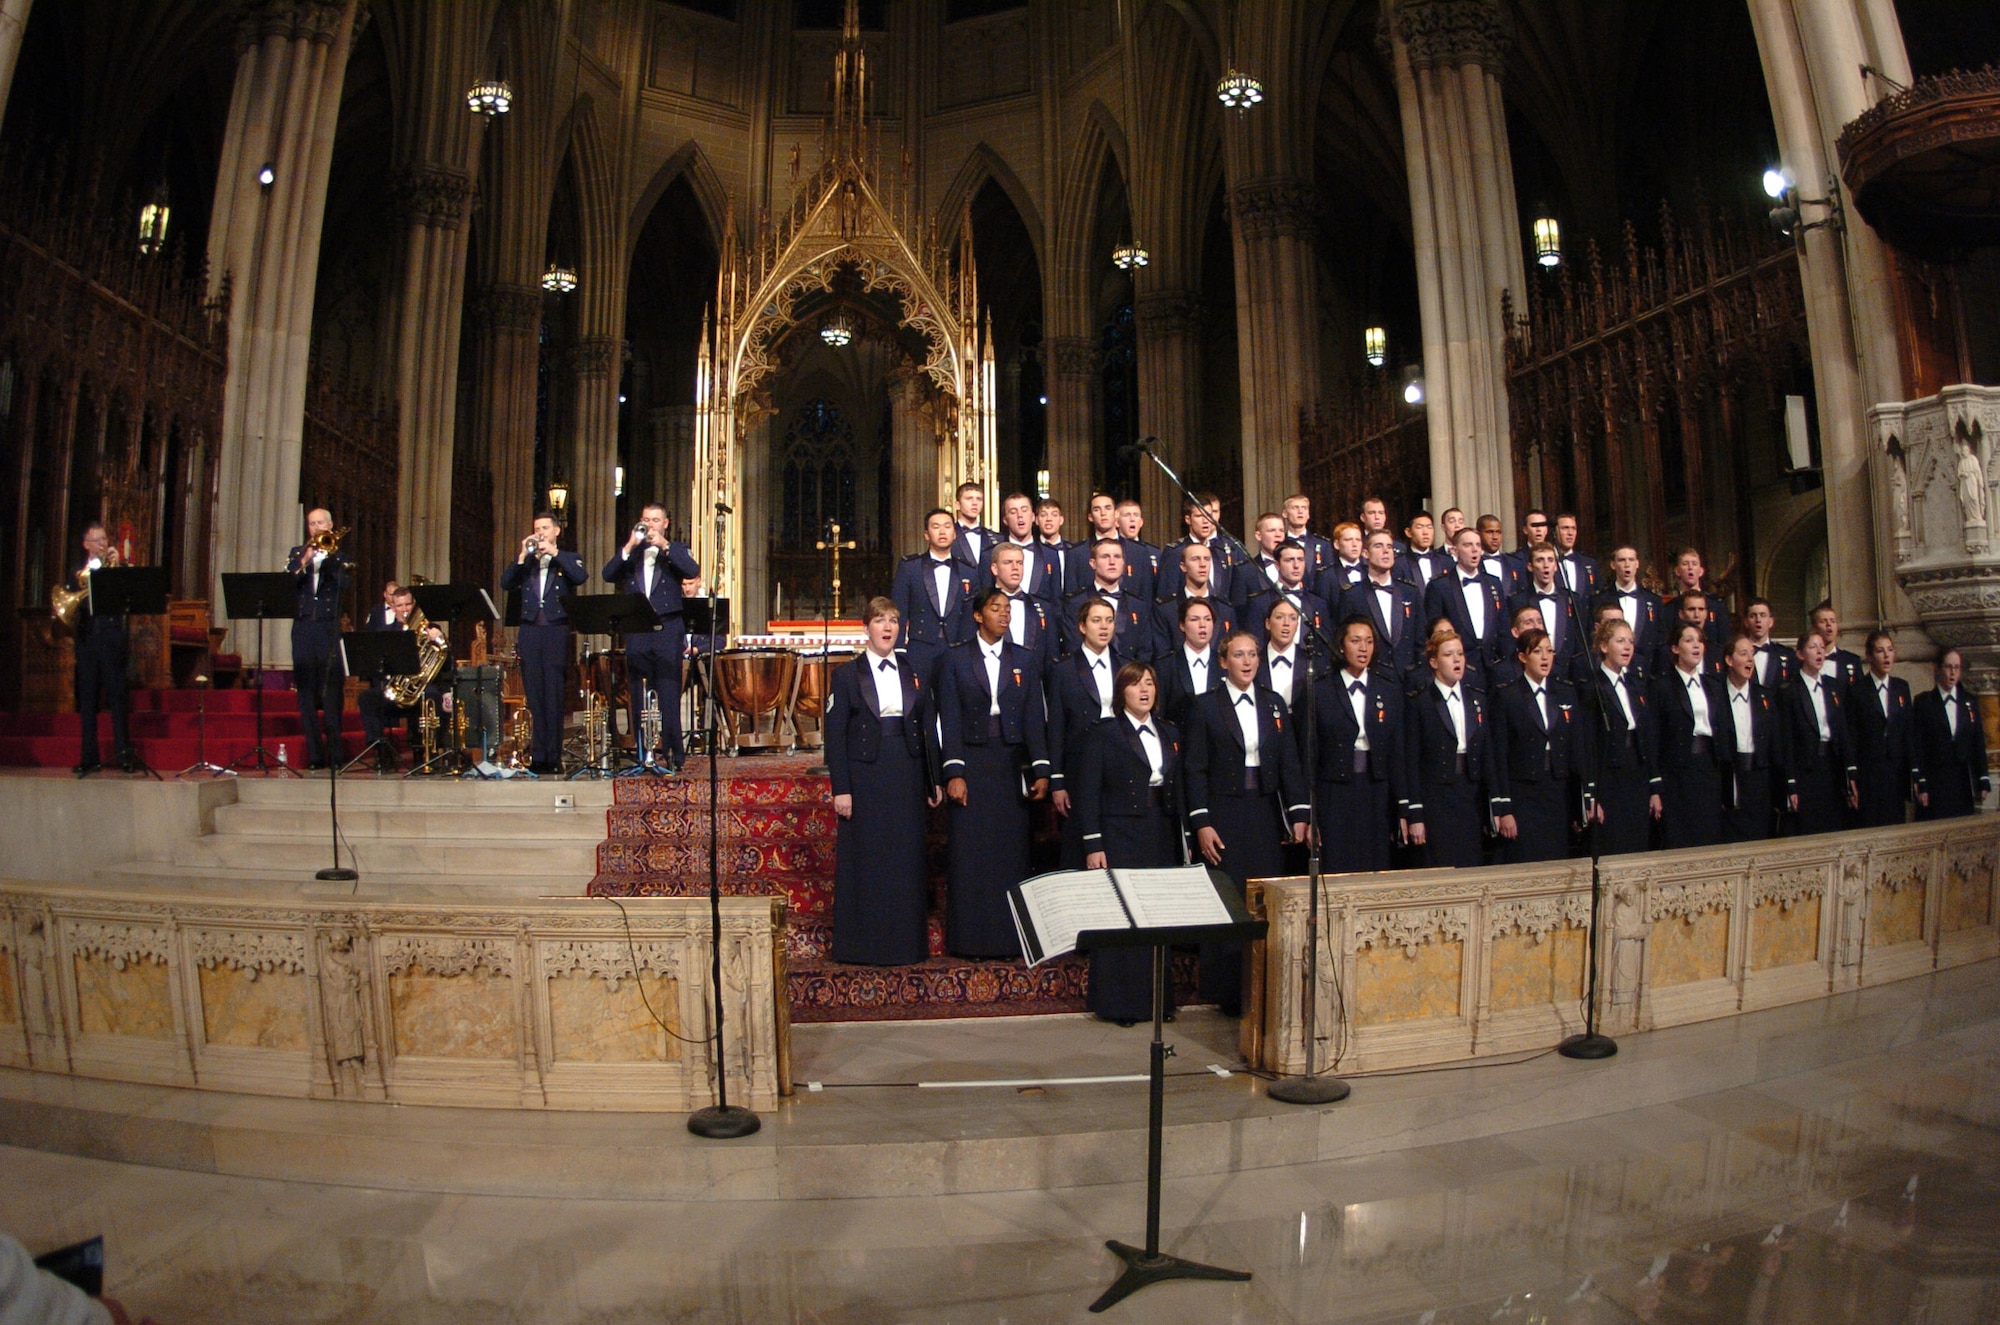 The U.S. Air Force Academy Cadet Chorale and Stellar Brass perform the first movement of "Gloria" by John Rutter Nov. 24 in New York City's St. Patrick's Cathedral. Between the full-house audience and 11 subsequent television and radio broadcasts of the concert, an estimated 1 million people heard the concert. The performance was part of a five-day tour by the academy band, accompanied by the cadet chorale and falconers, in which it had five national television appearances. (U.S. Air Force photo/1st Lt. John Ross) 